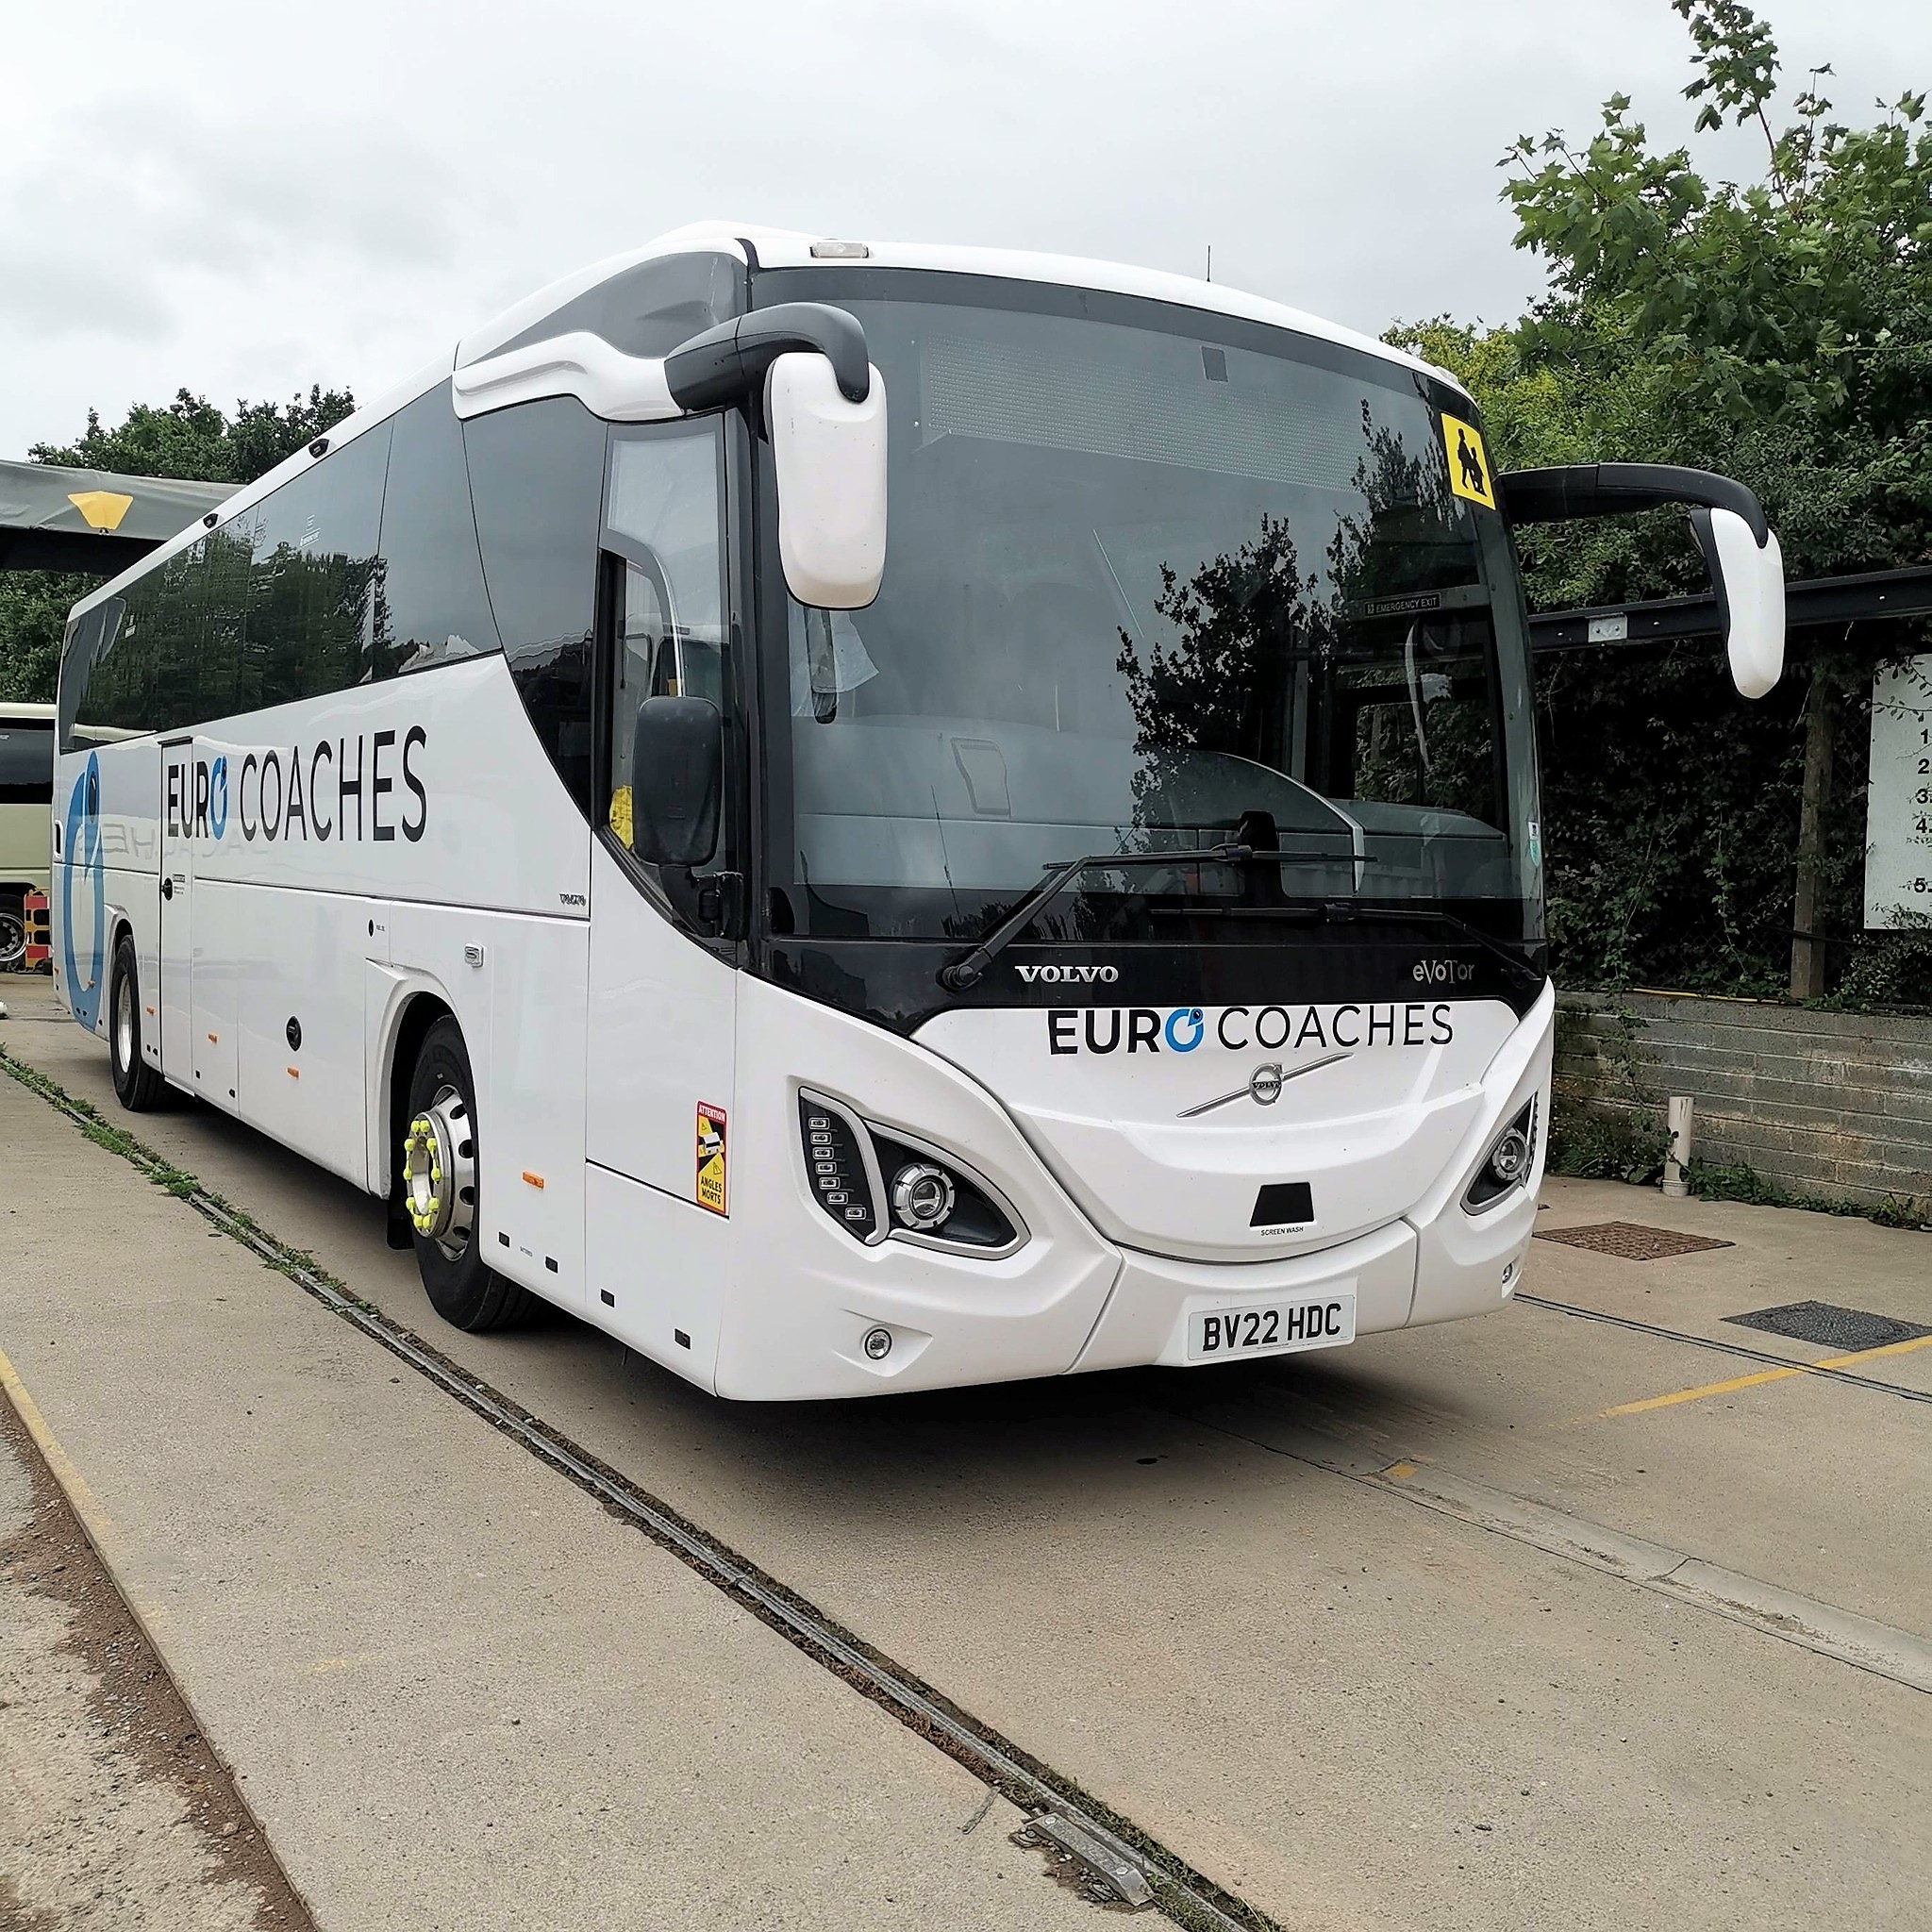 Eurocoaches improves safety with Trakm8